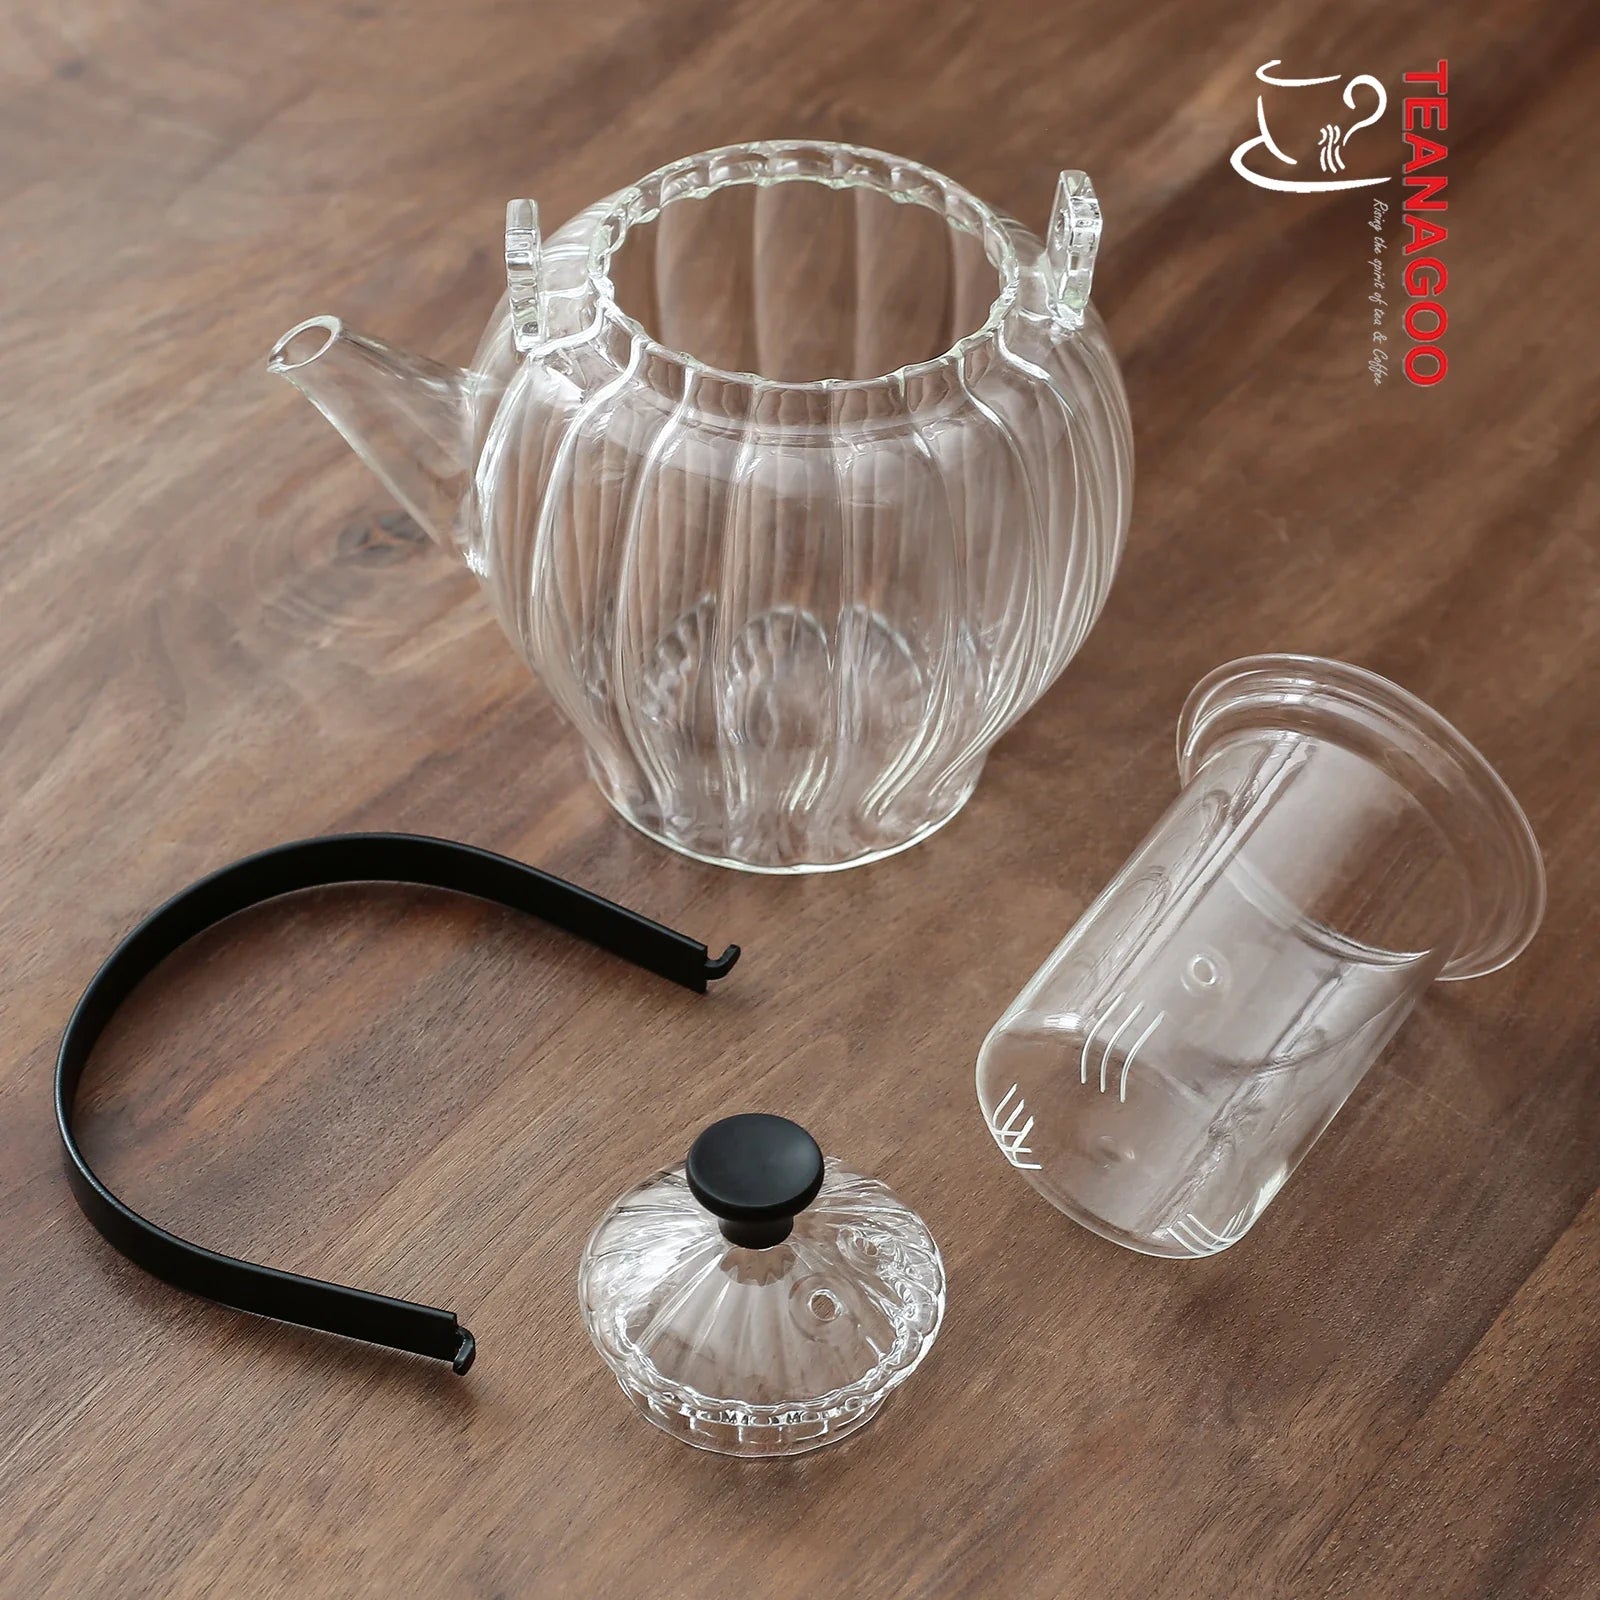 Pyrex teapot with glass infuser safe on stovetop to brew tea